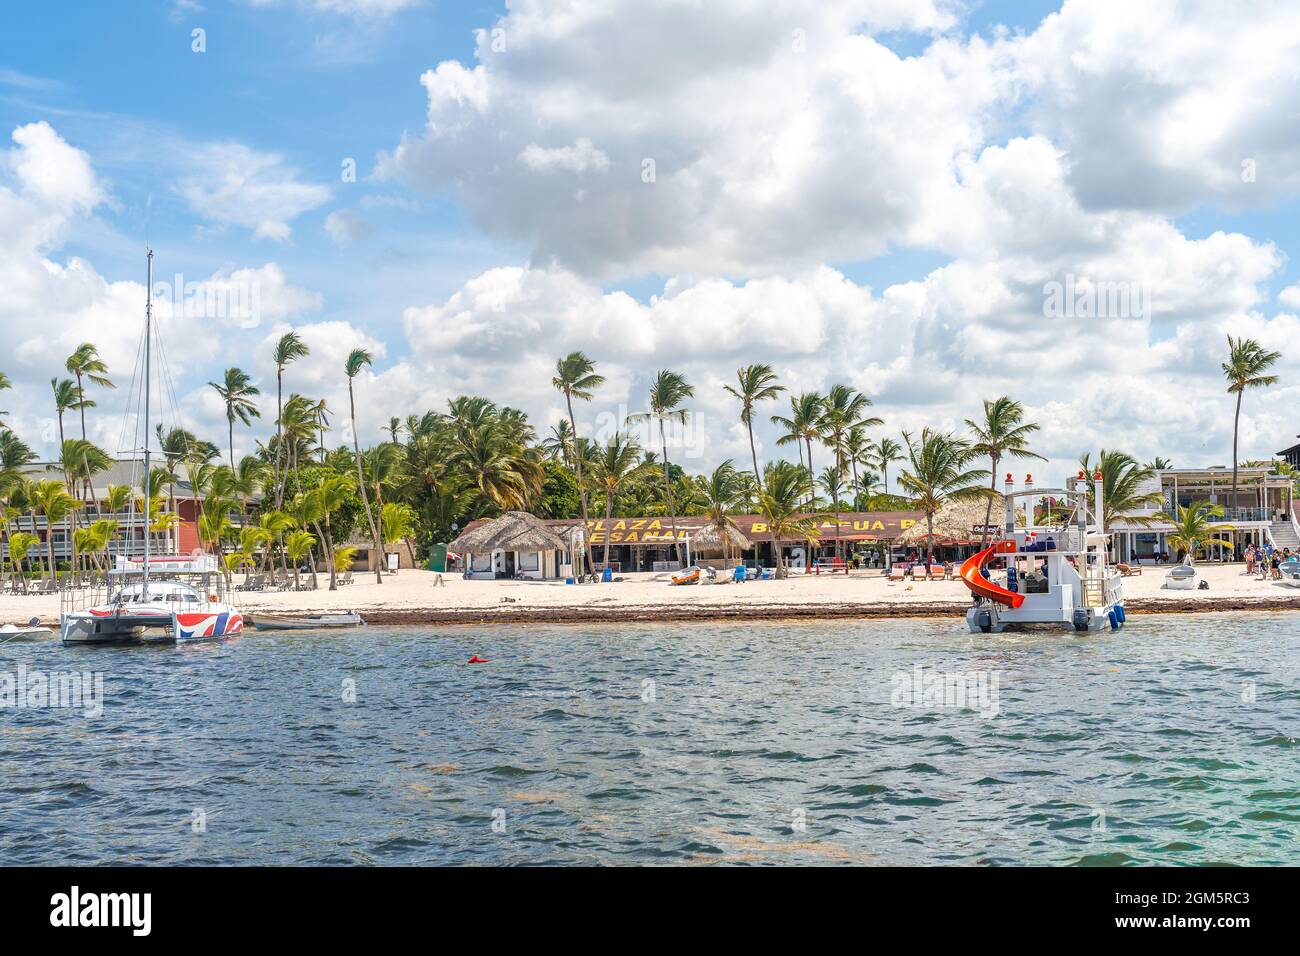 Dominican Beach Plaza with Palm Trees Water Boats and Beautiful White Sands. Stock Photo